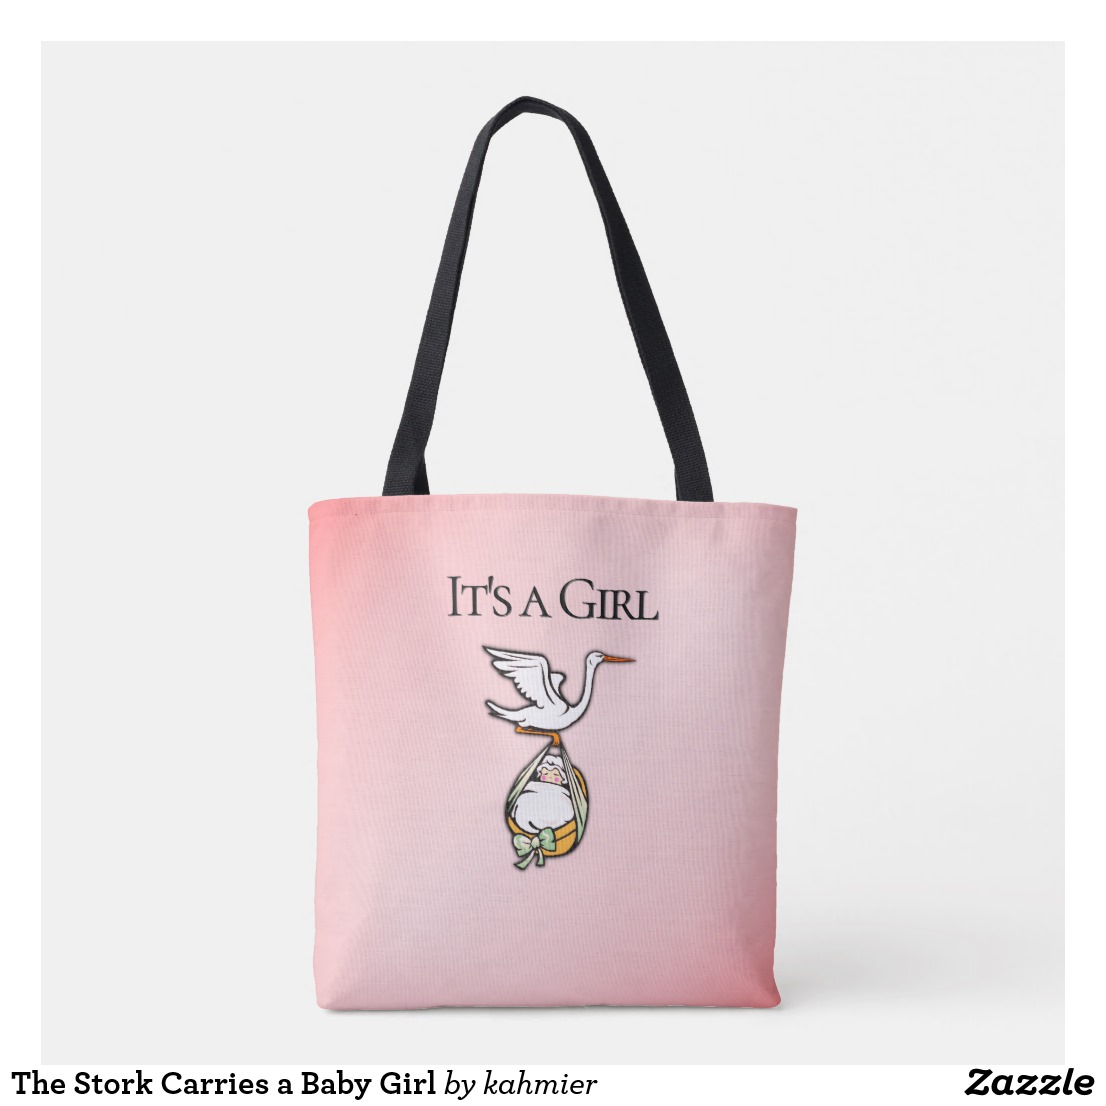 The Stork Carries a Baby Girl Tote Bag